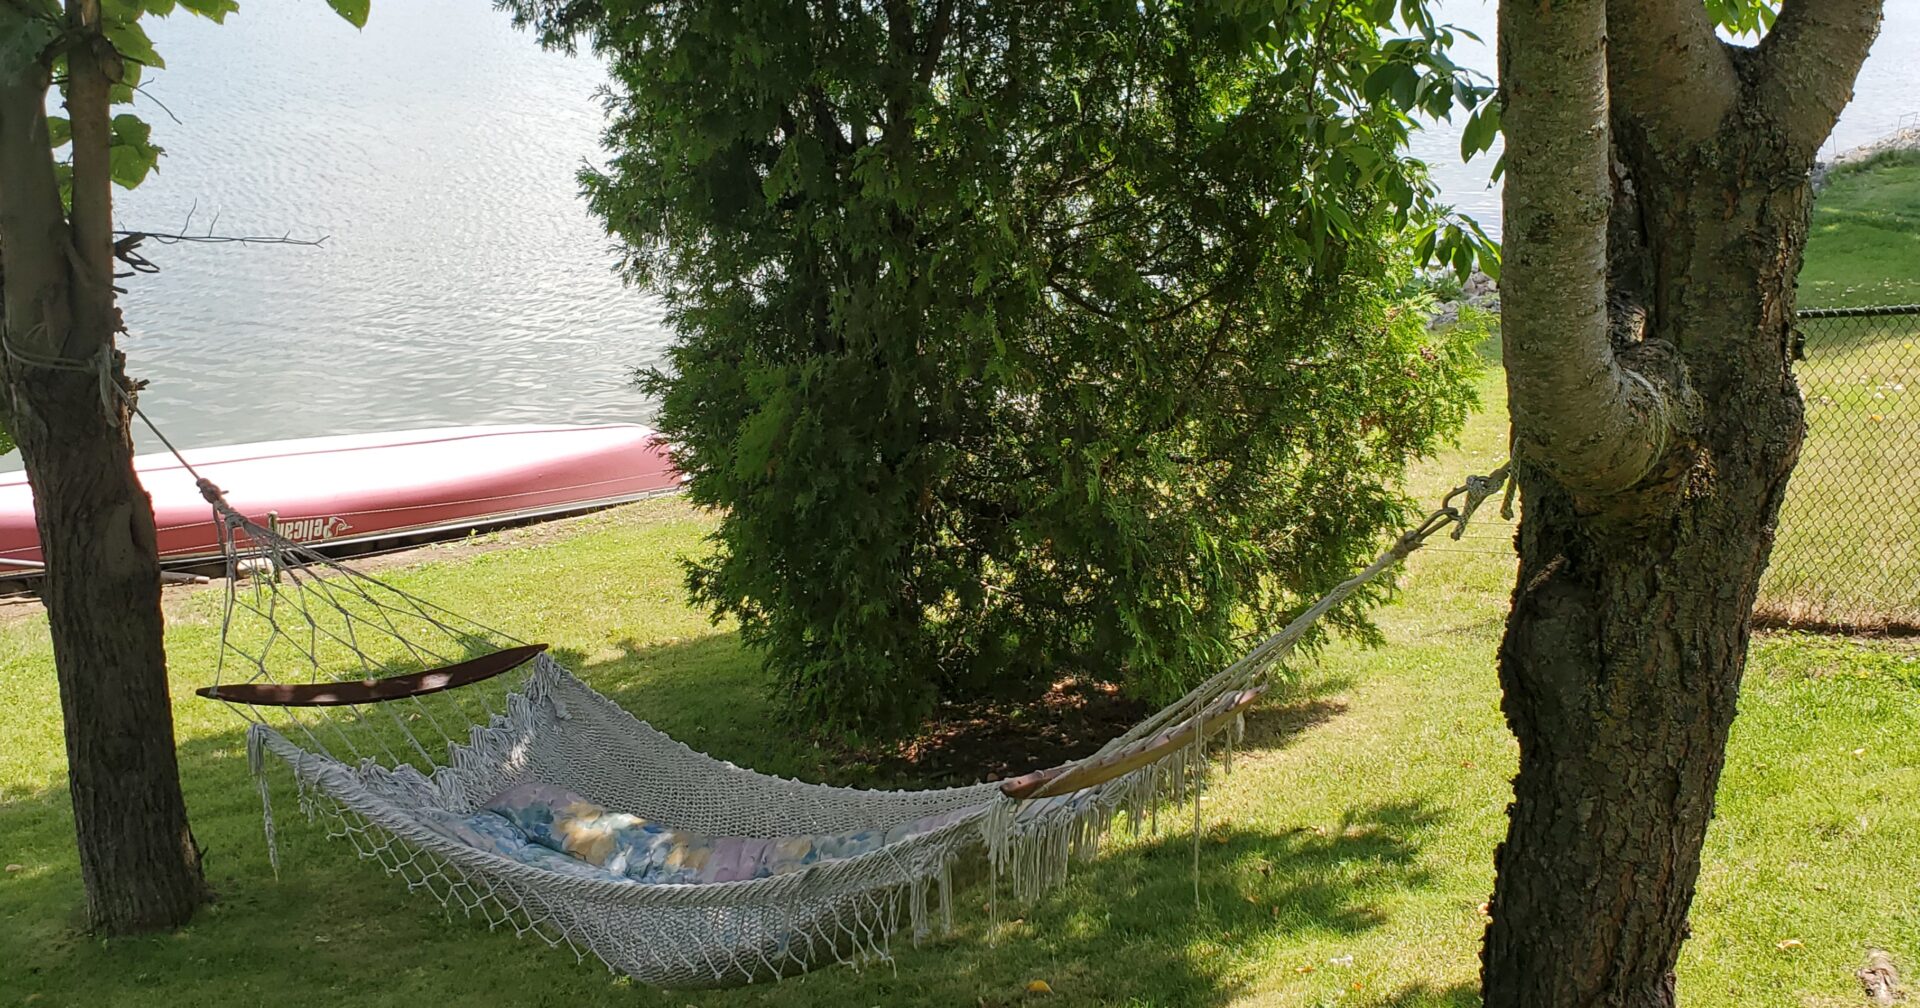 A hammock is hanging near the water and trees.